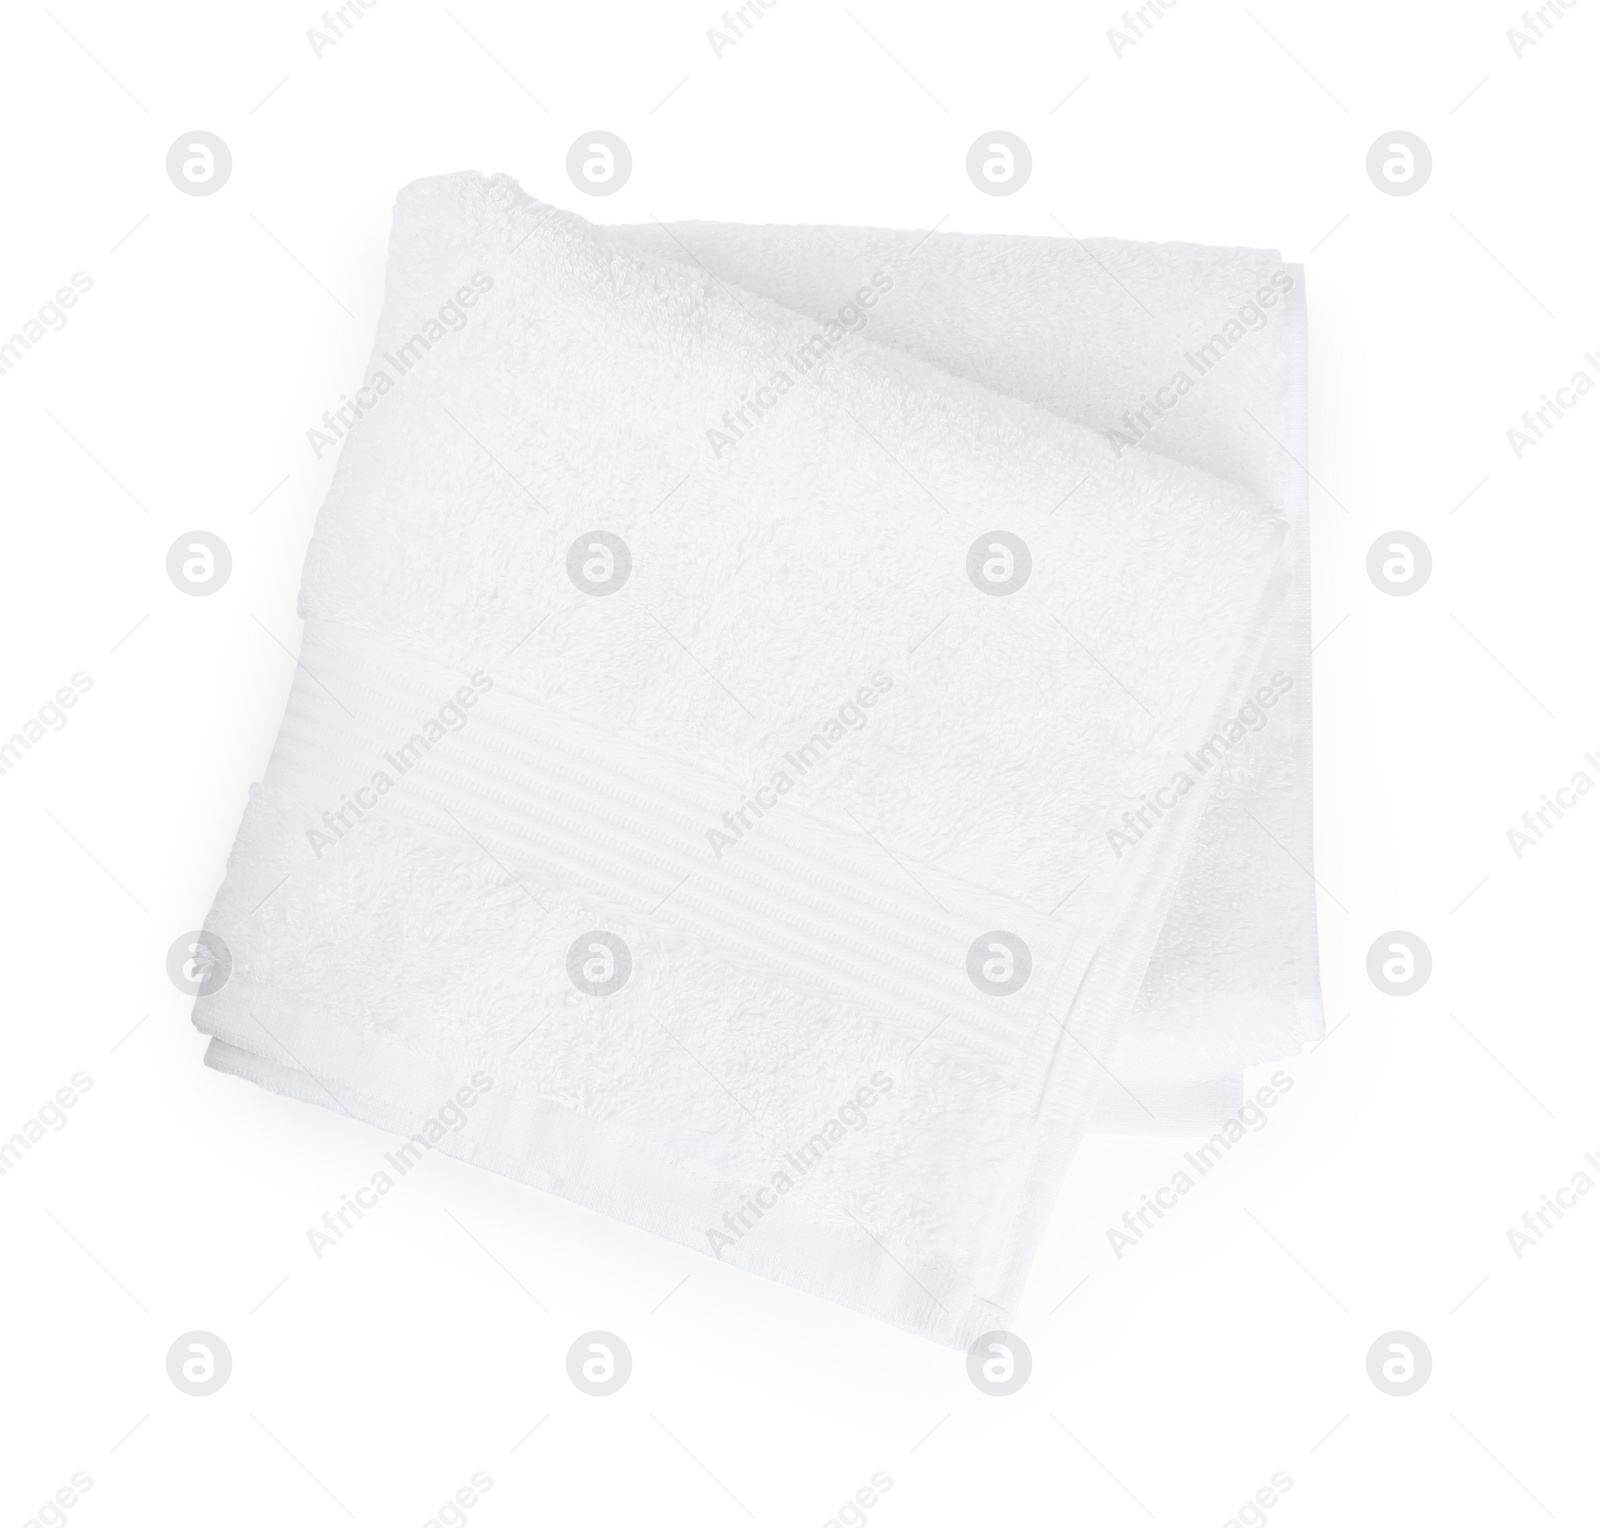 Photo of Terry towels isolated on white, top view